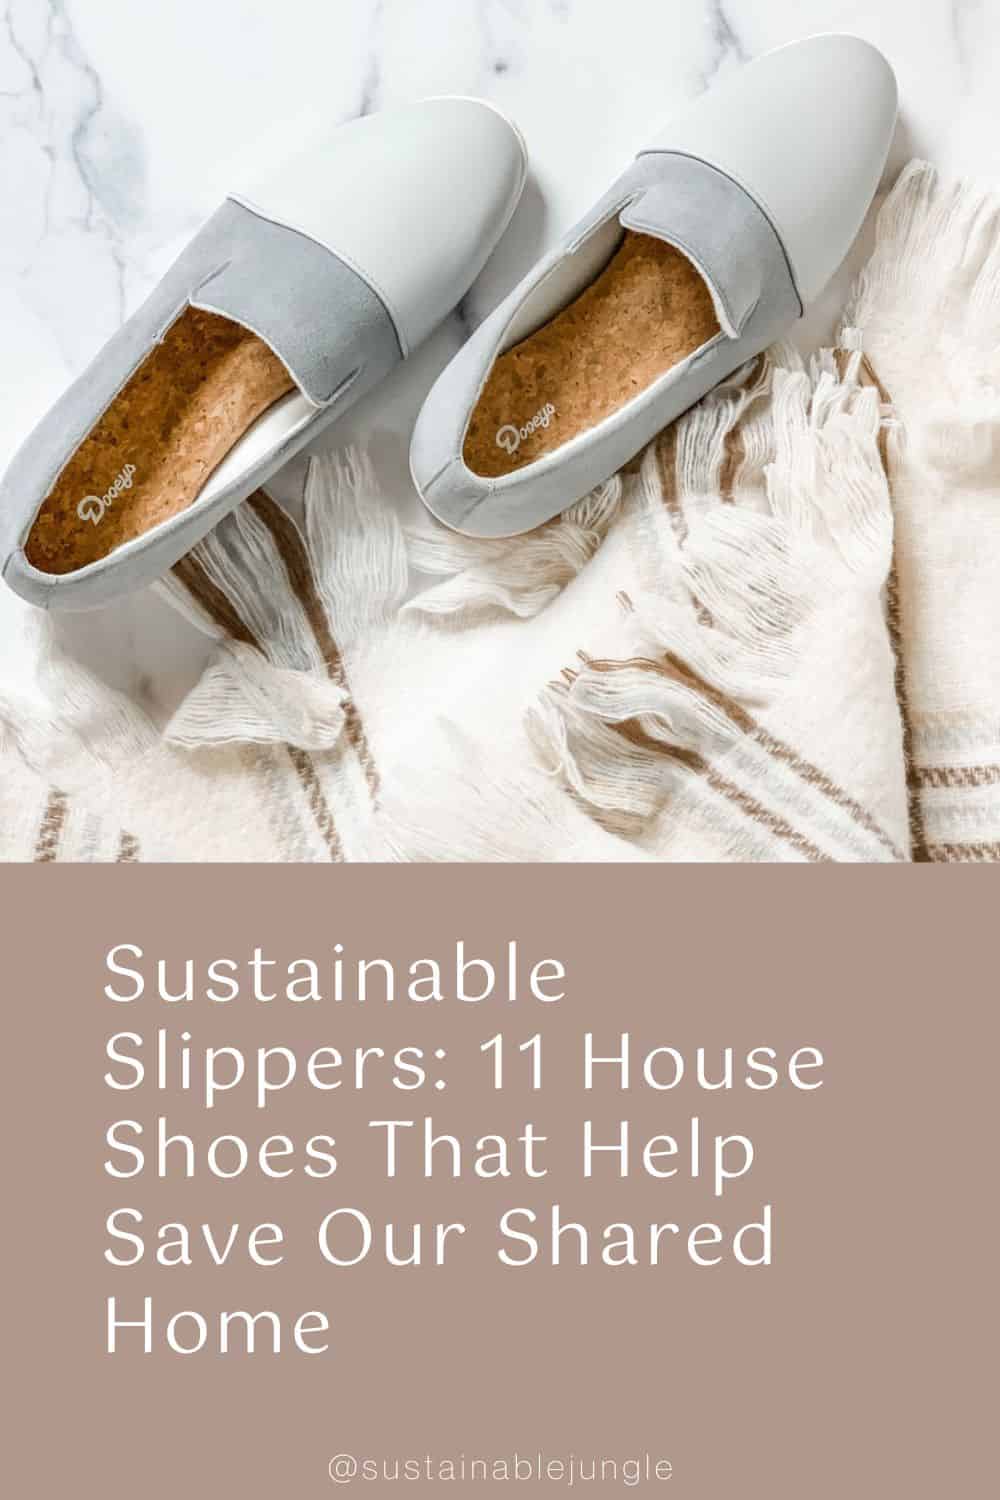 Sustainable Slippers: 11 House Shoes That Help Save Our Shared Home Image by Dooeys #sustainableslippers #bestsustainableslippers #ecofriendlyslippers #ethicalslippers #sustainablejungle